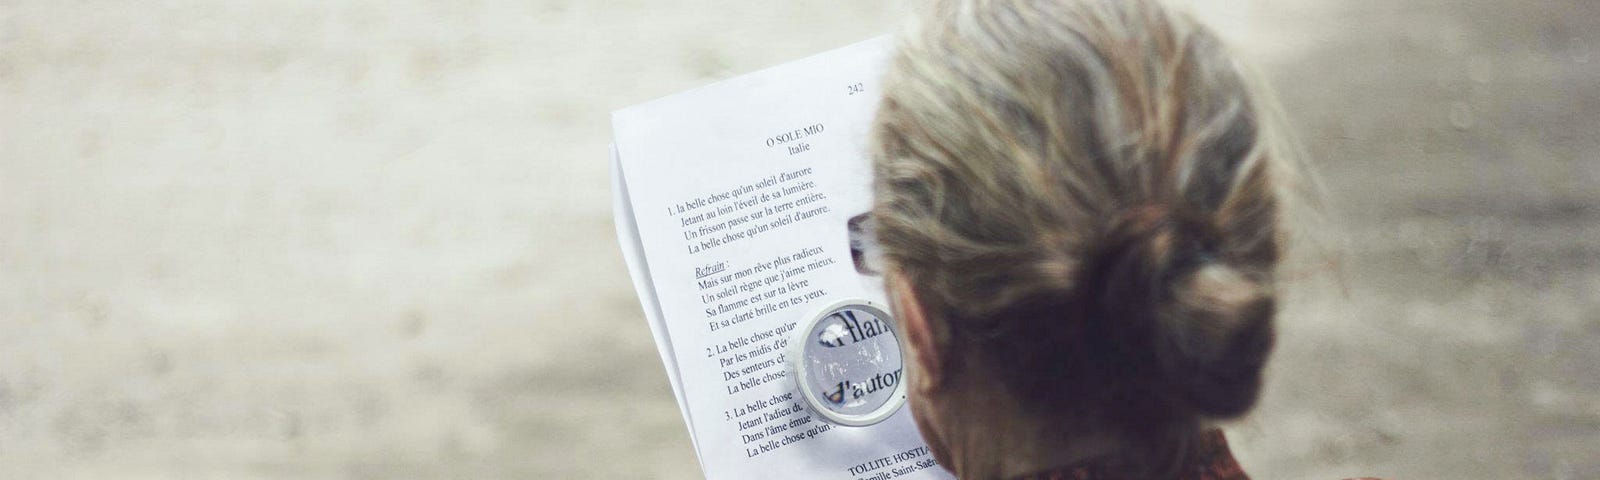 Woman reading a paper using a magnifying glass